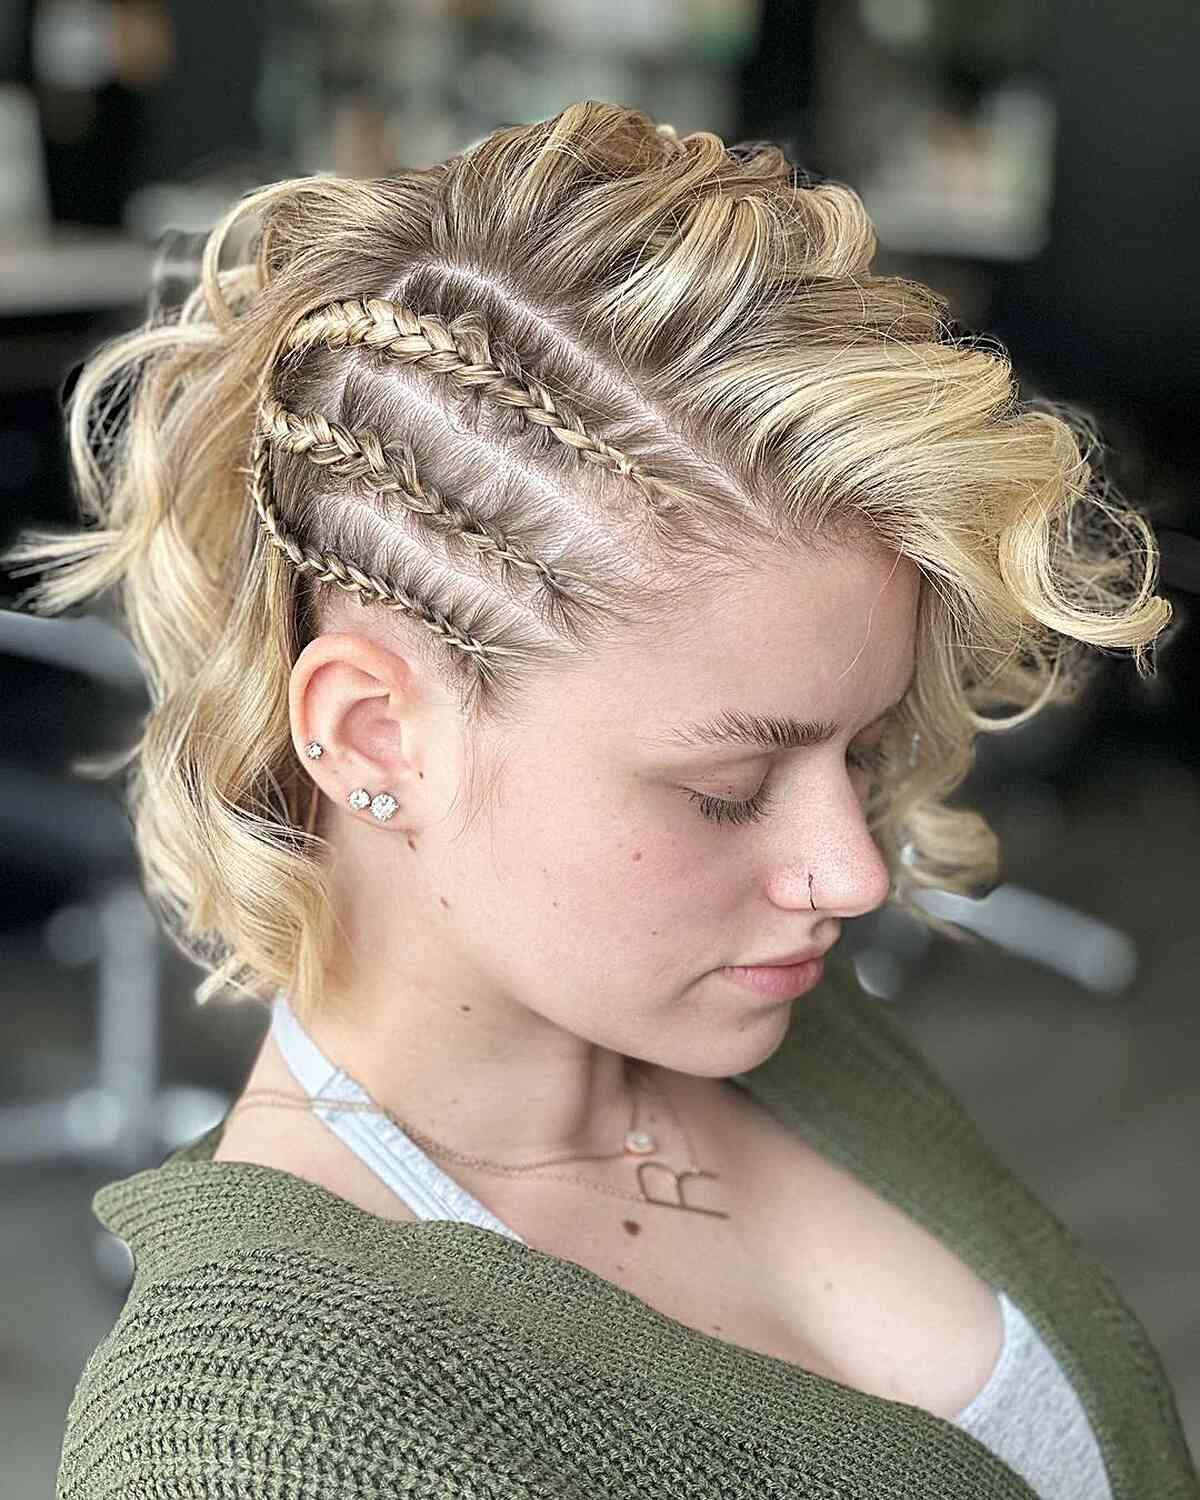 Viking Short Blonde Hair with Layered Waves and Small Braids